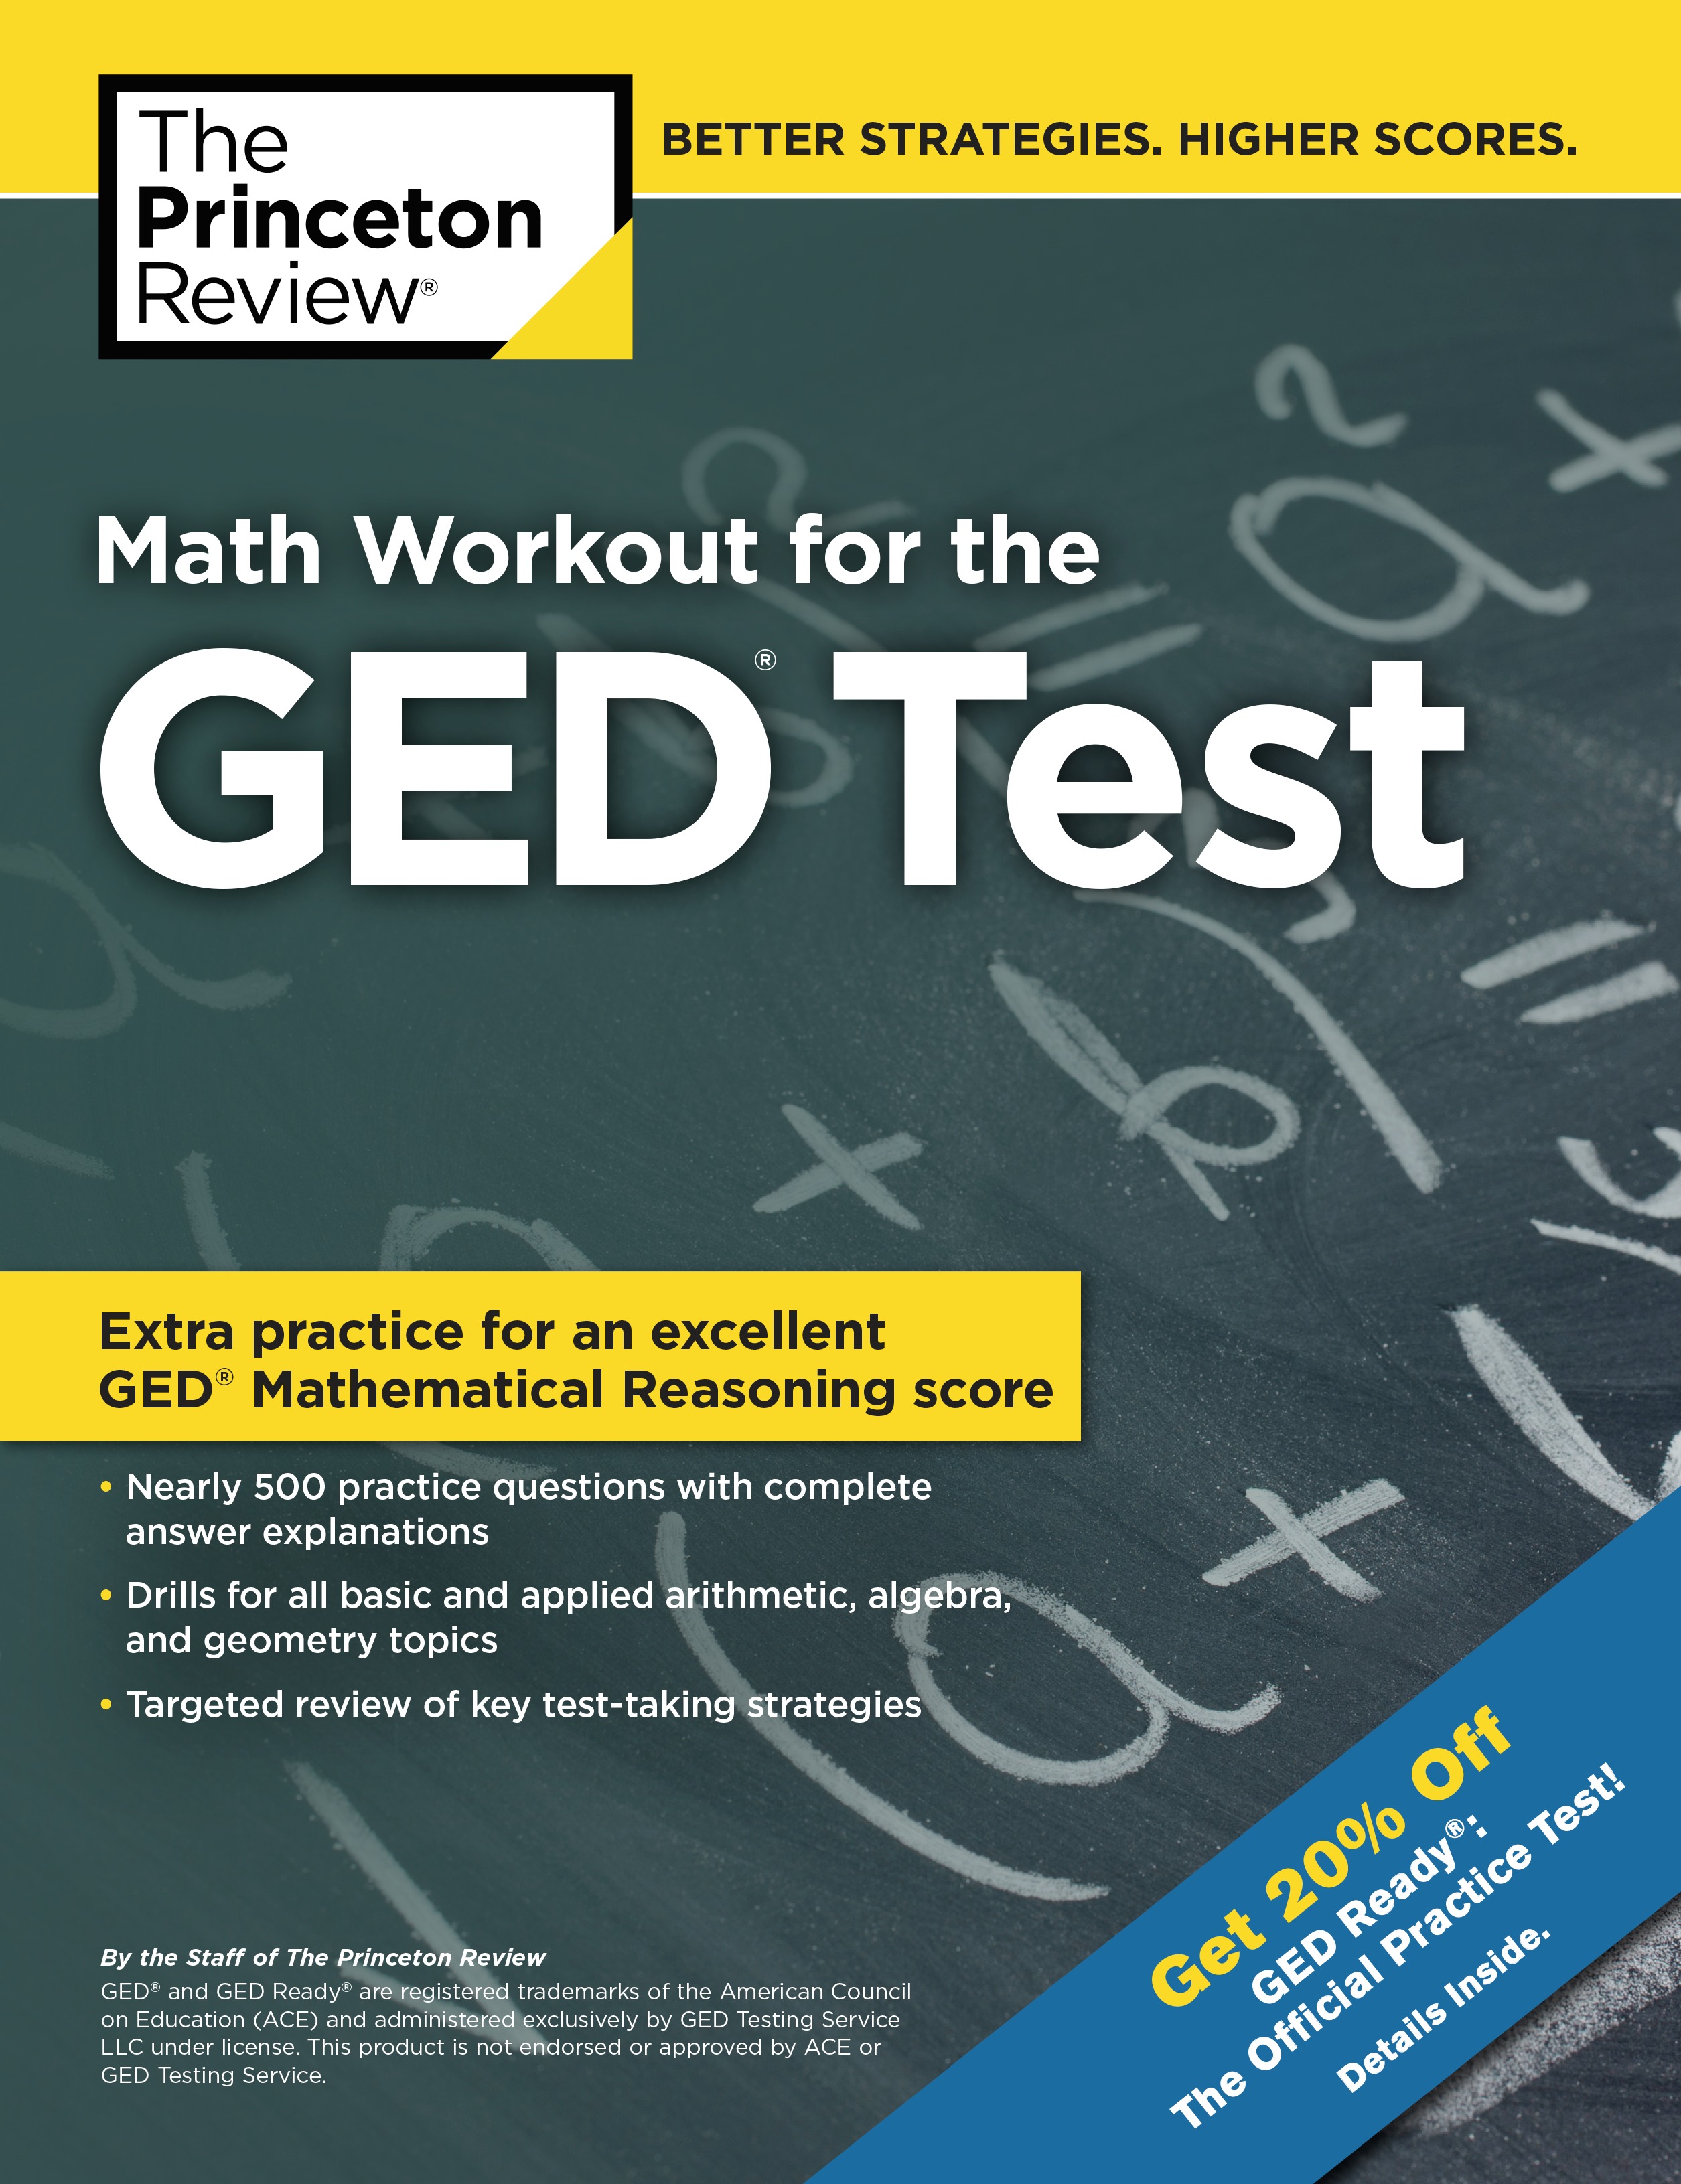 Math Workout for the GED Test